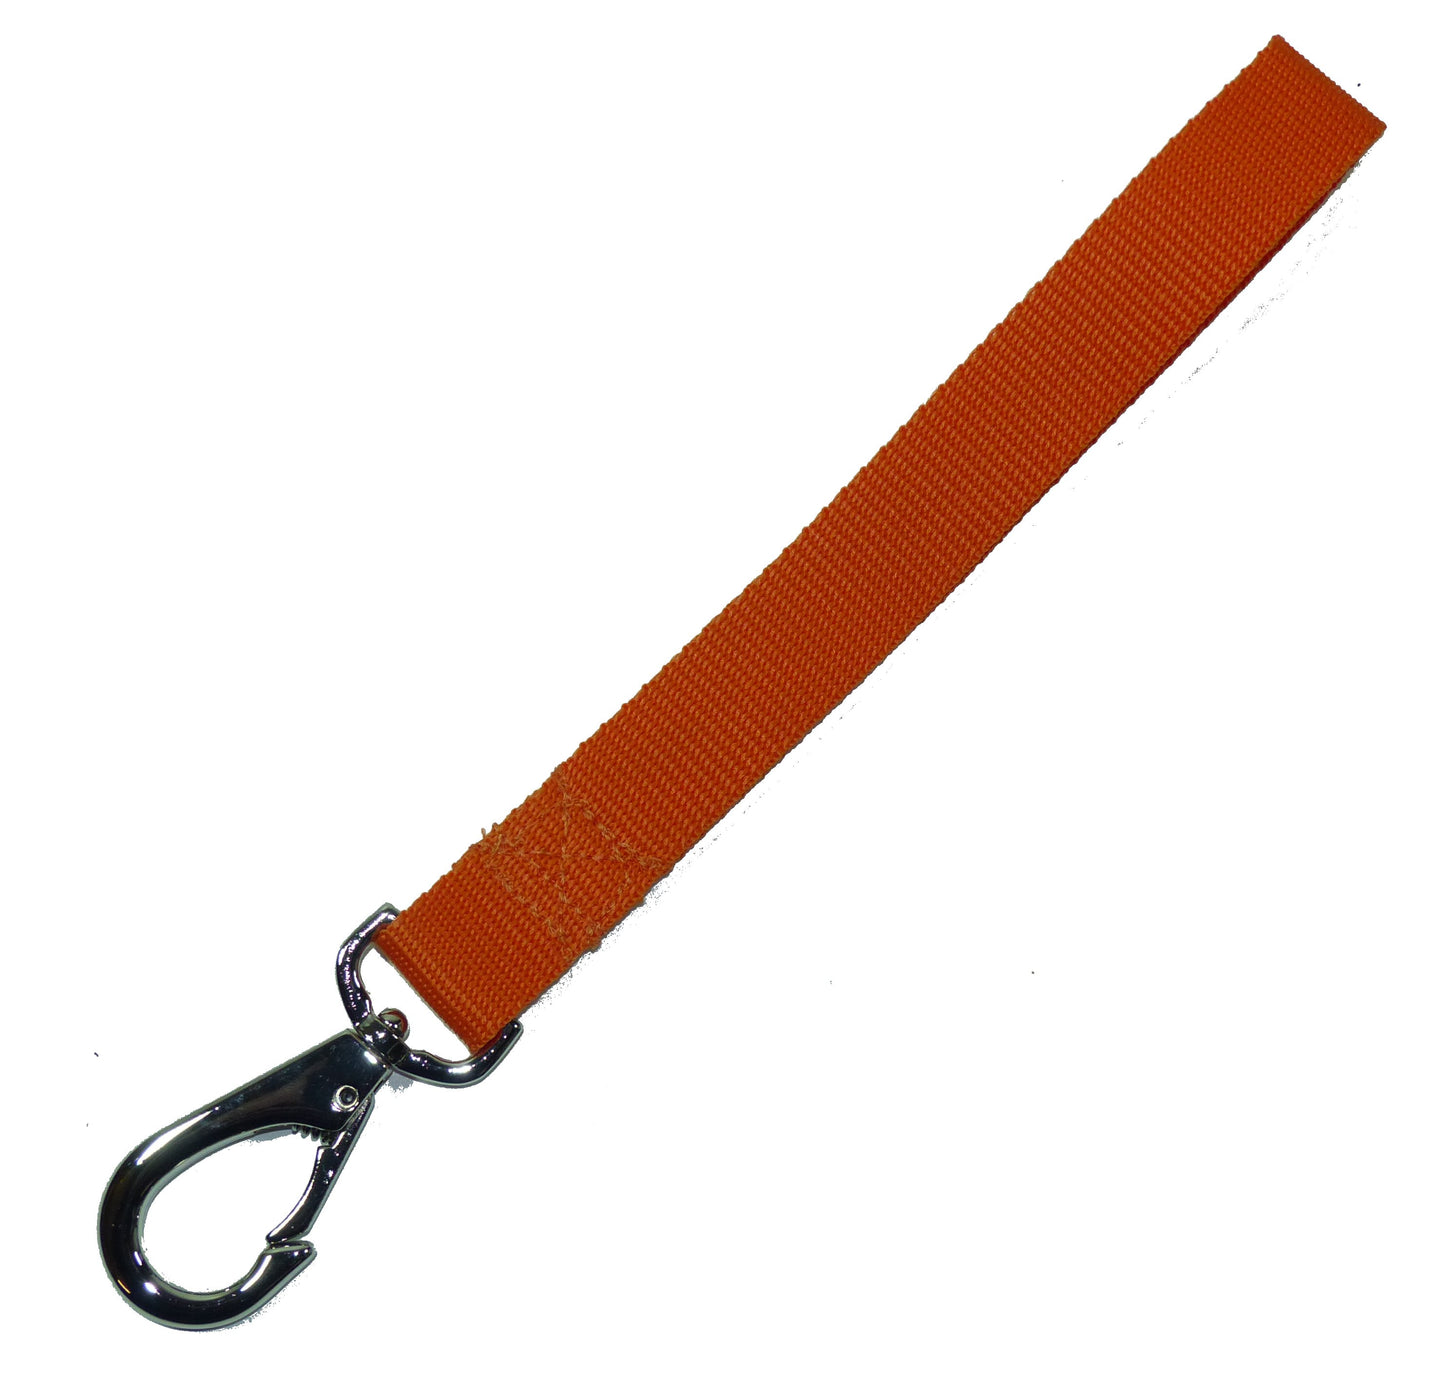 25mm Buggy Handle Carry Strap in orange